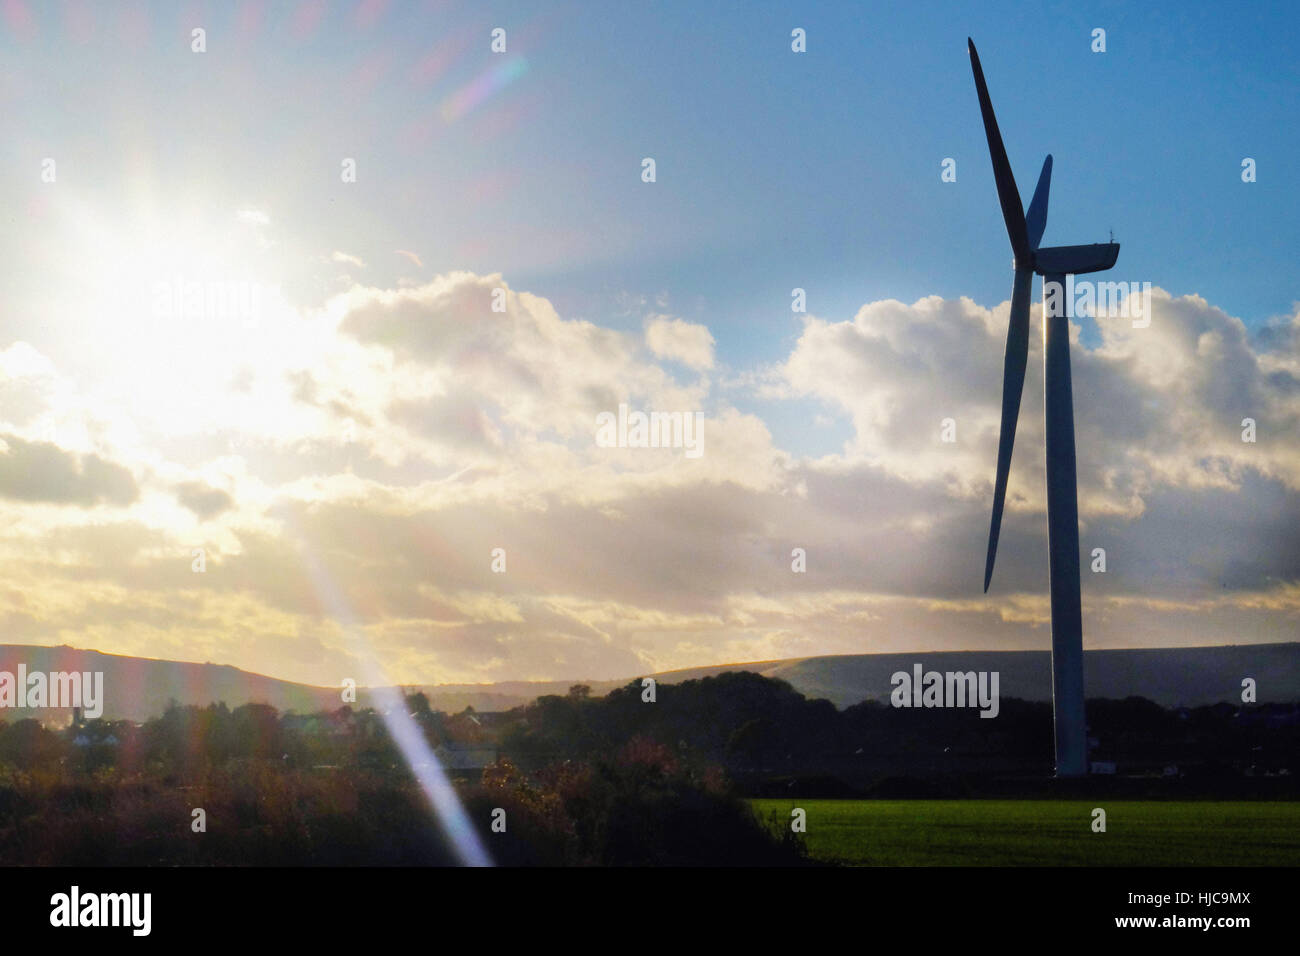 Sunlit silhouetted wind turbine in rural landscape Stock Photo